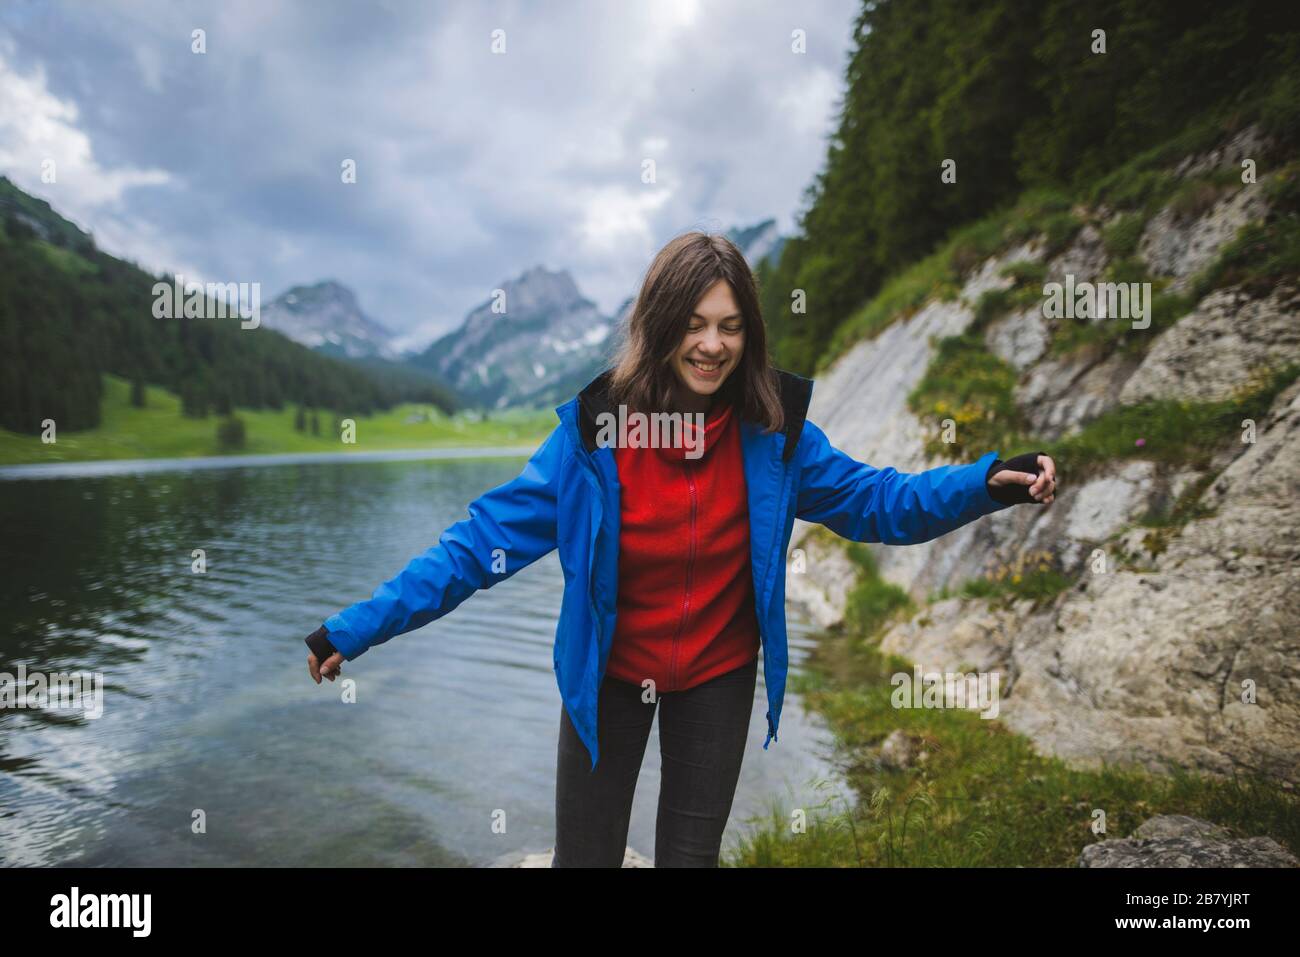 Smiling young woman in blue jacket by lake Stock Photo